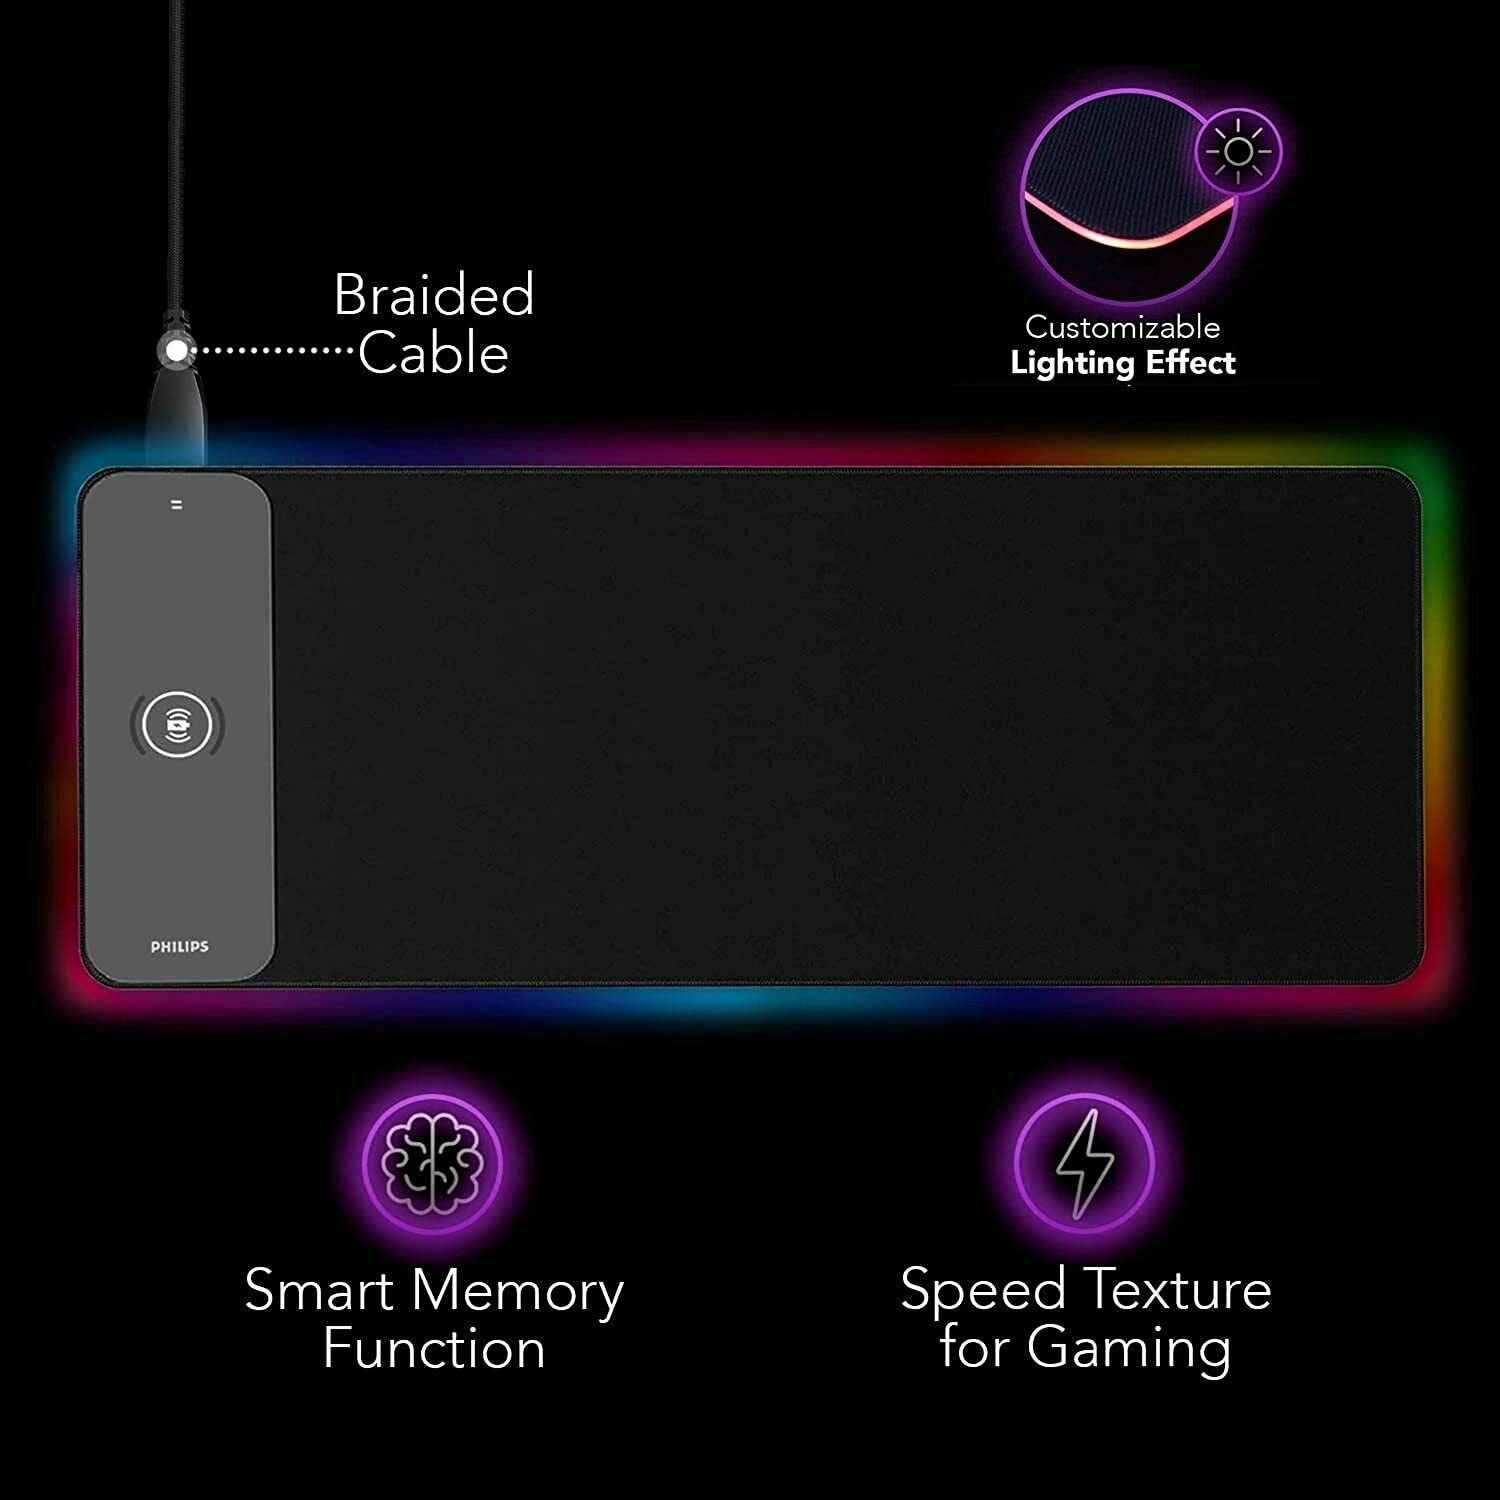 NeeGo RGB Gaming Large Mouse Pad, Wireless Charging, Computer Keyboard - image 4 of 9